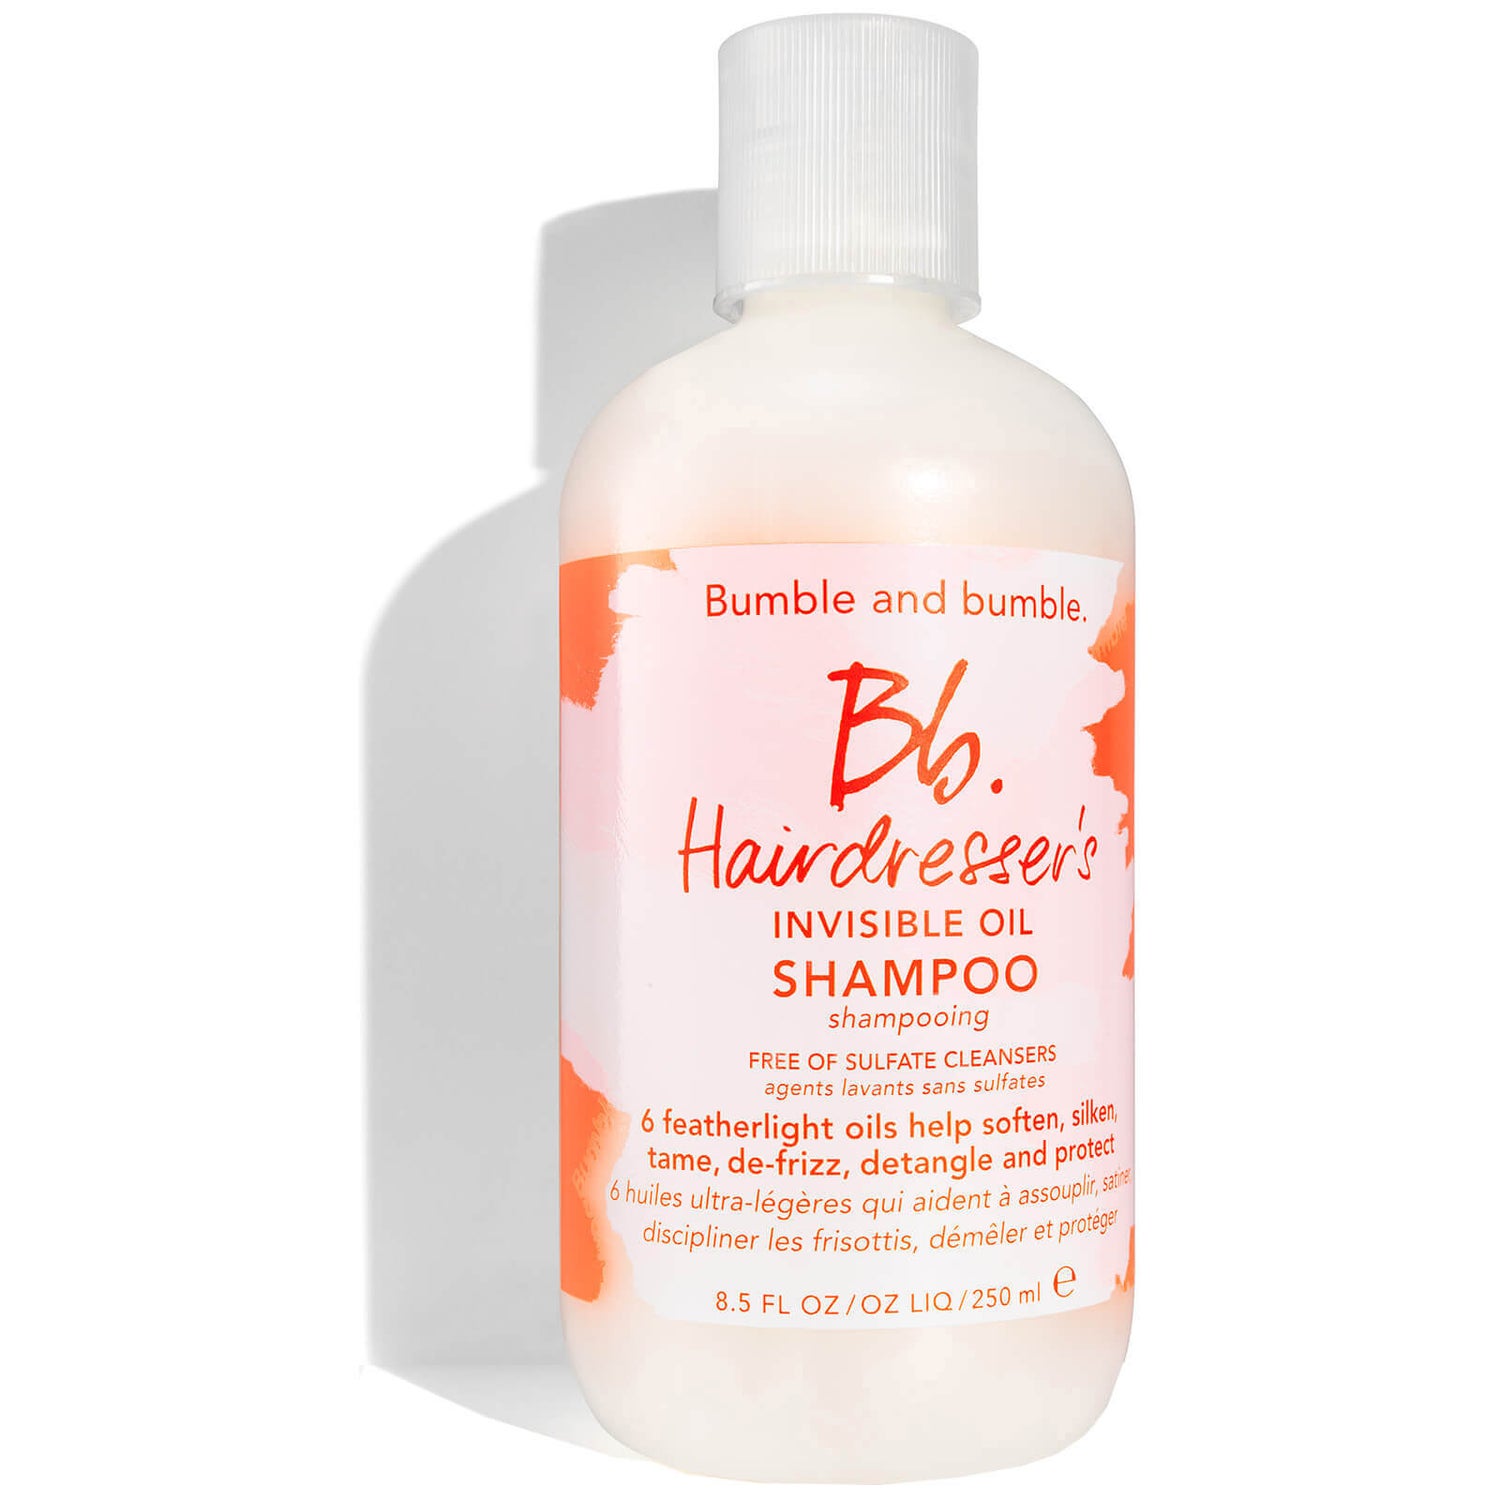 Bumble and bumble Hairdressers Invisible Oil Sulfate Free Shampoo 250 ml